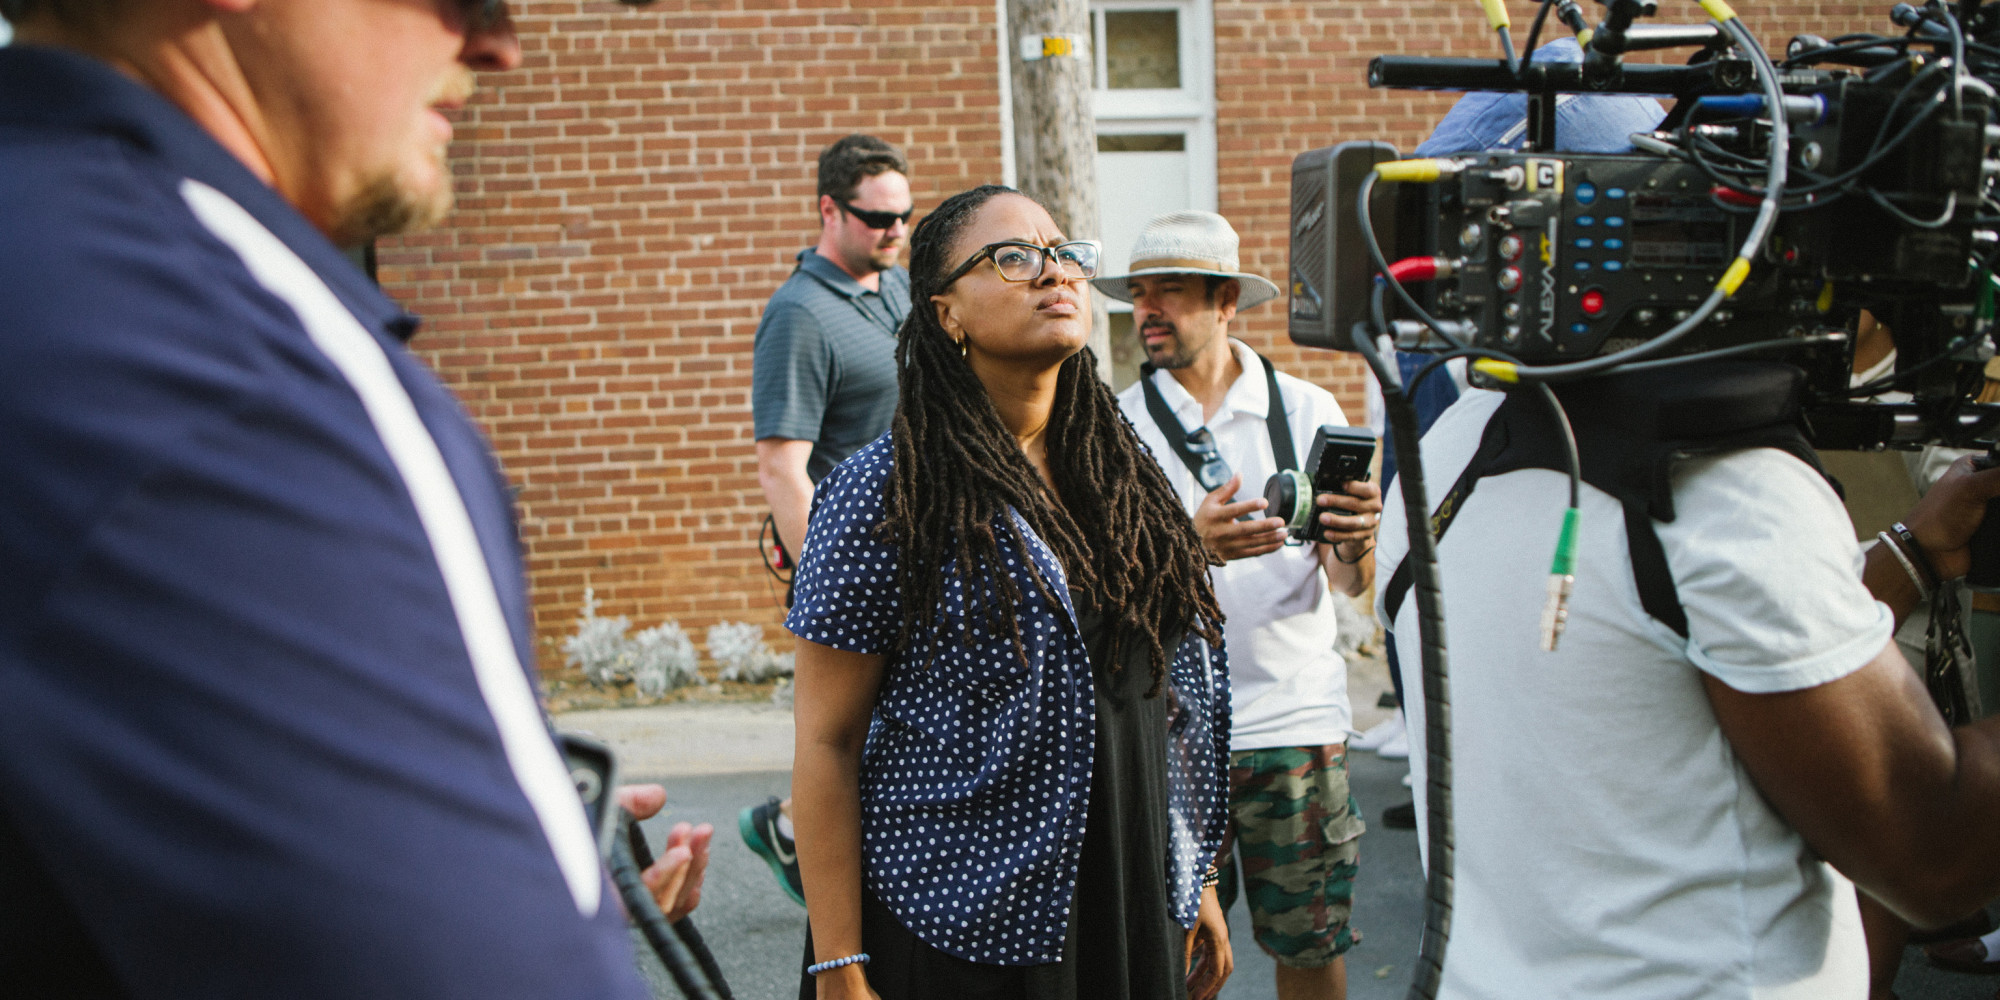 ava duvernay directing directors selma female hollywood why blockbuster burying dinosaurs change need sexist fortune